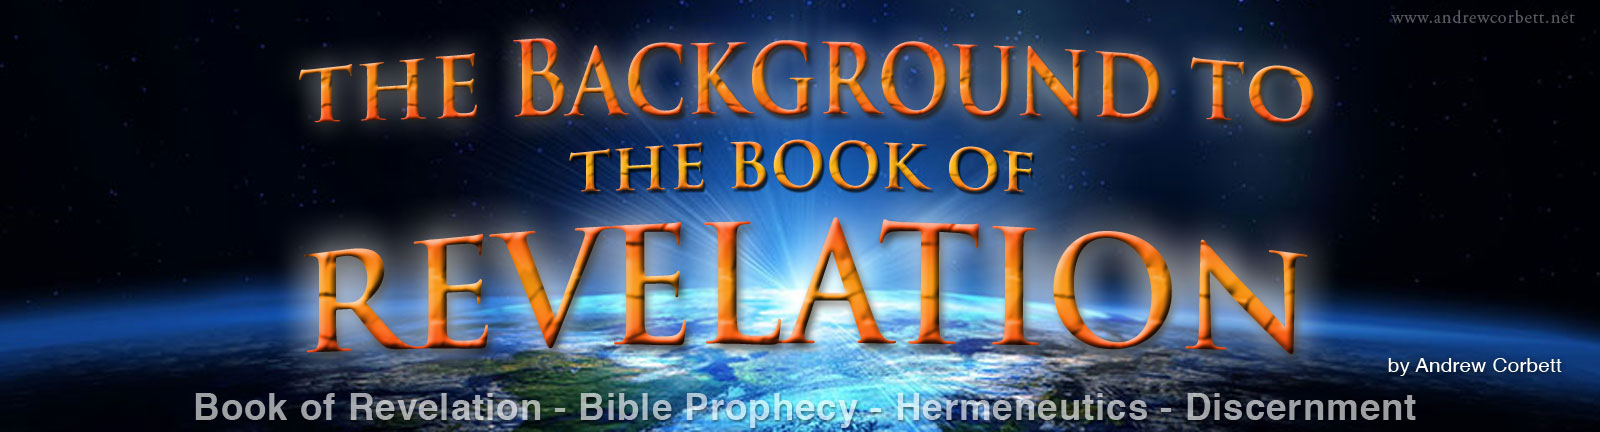 Understand The Background to the Book of Revelation